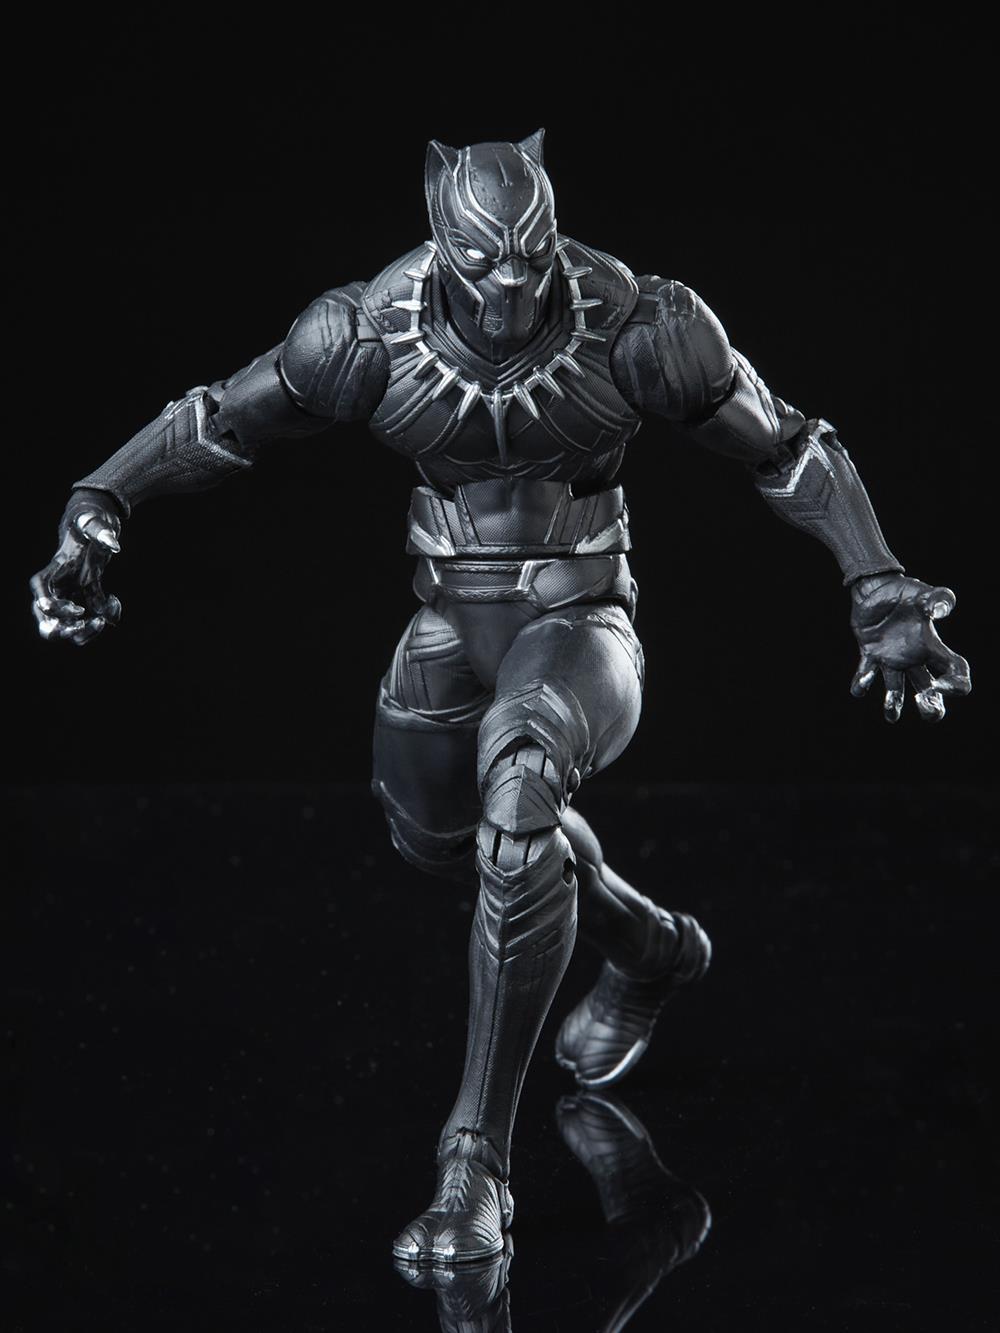 BLACK PANTHER Action Figure F3428 Marvel Toys Legacy Collection Legends Series